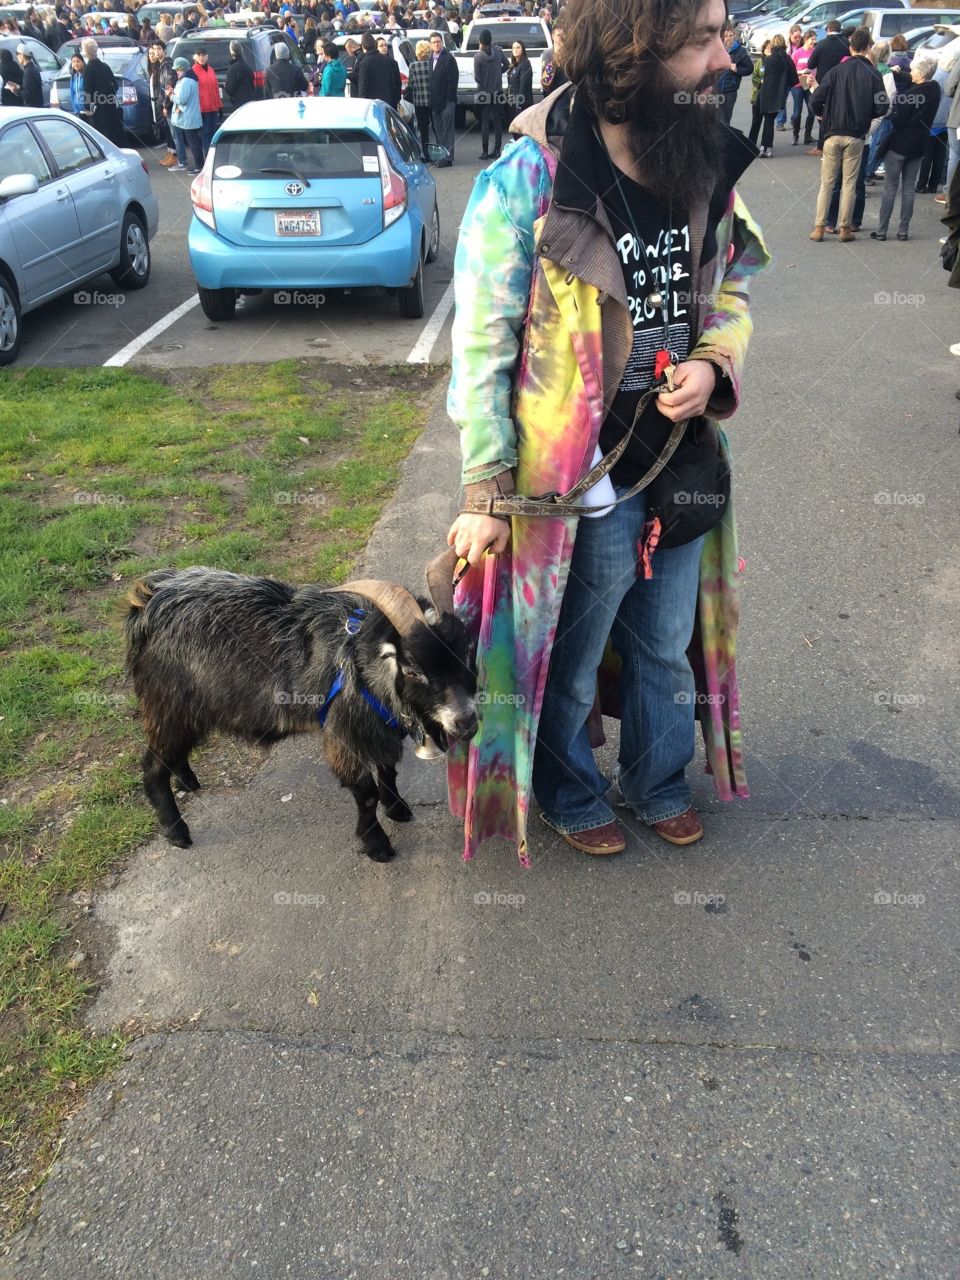 A man with a goat at a Hilary Clinton rally in Seattle.